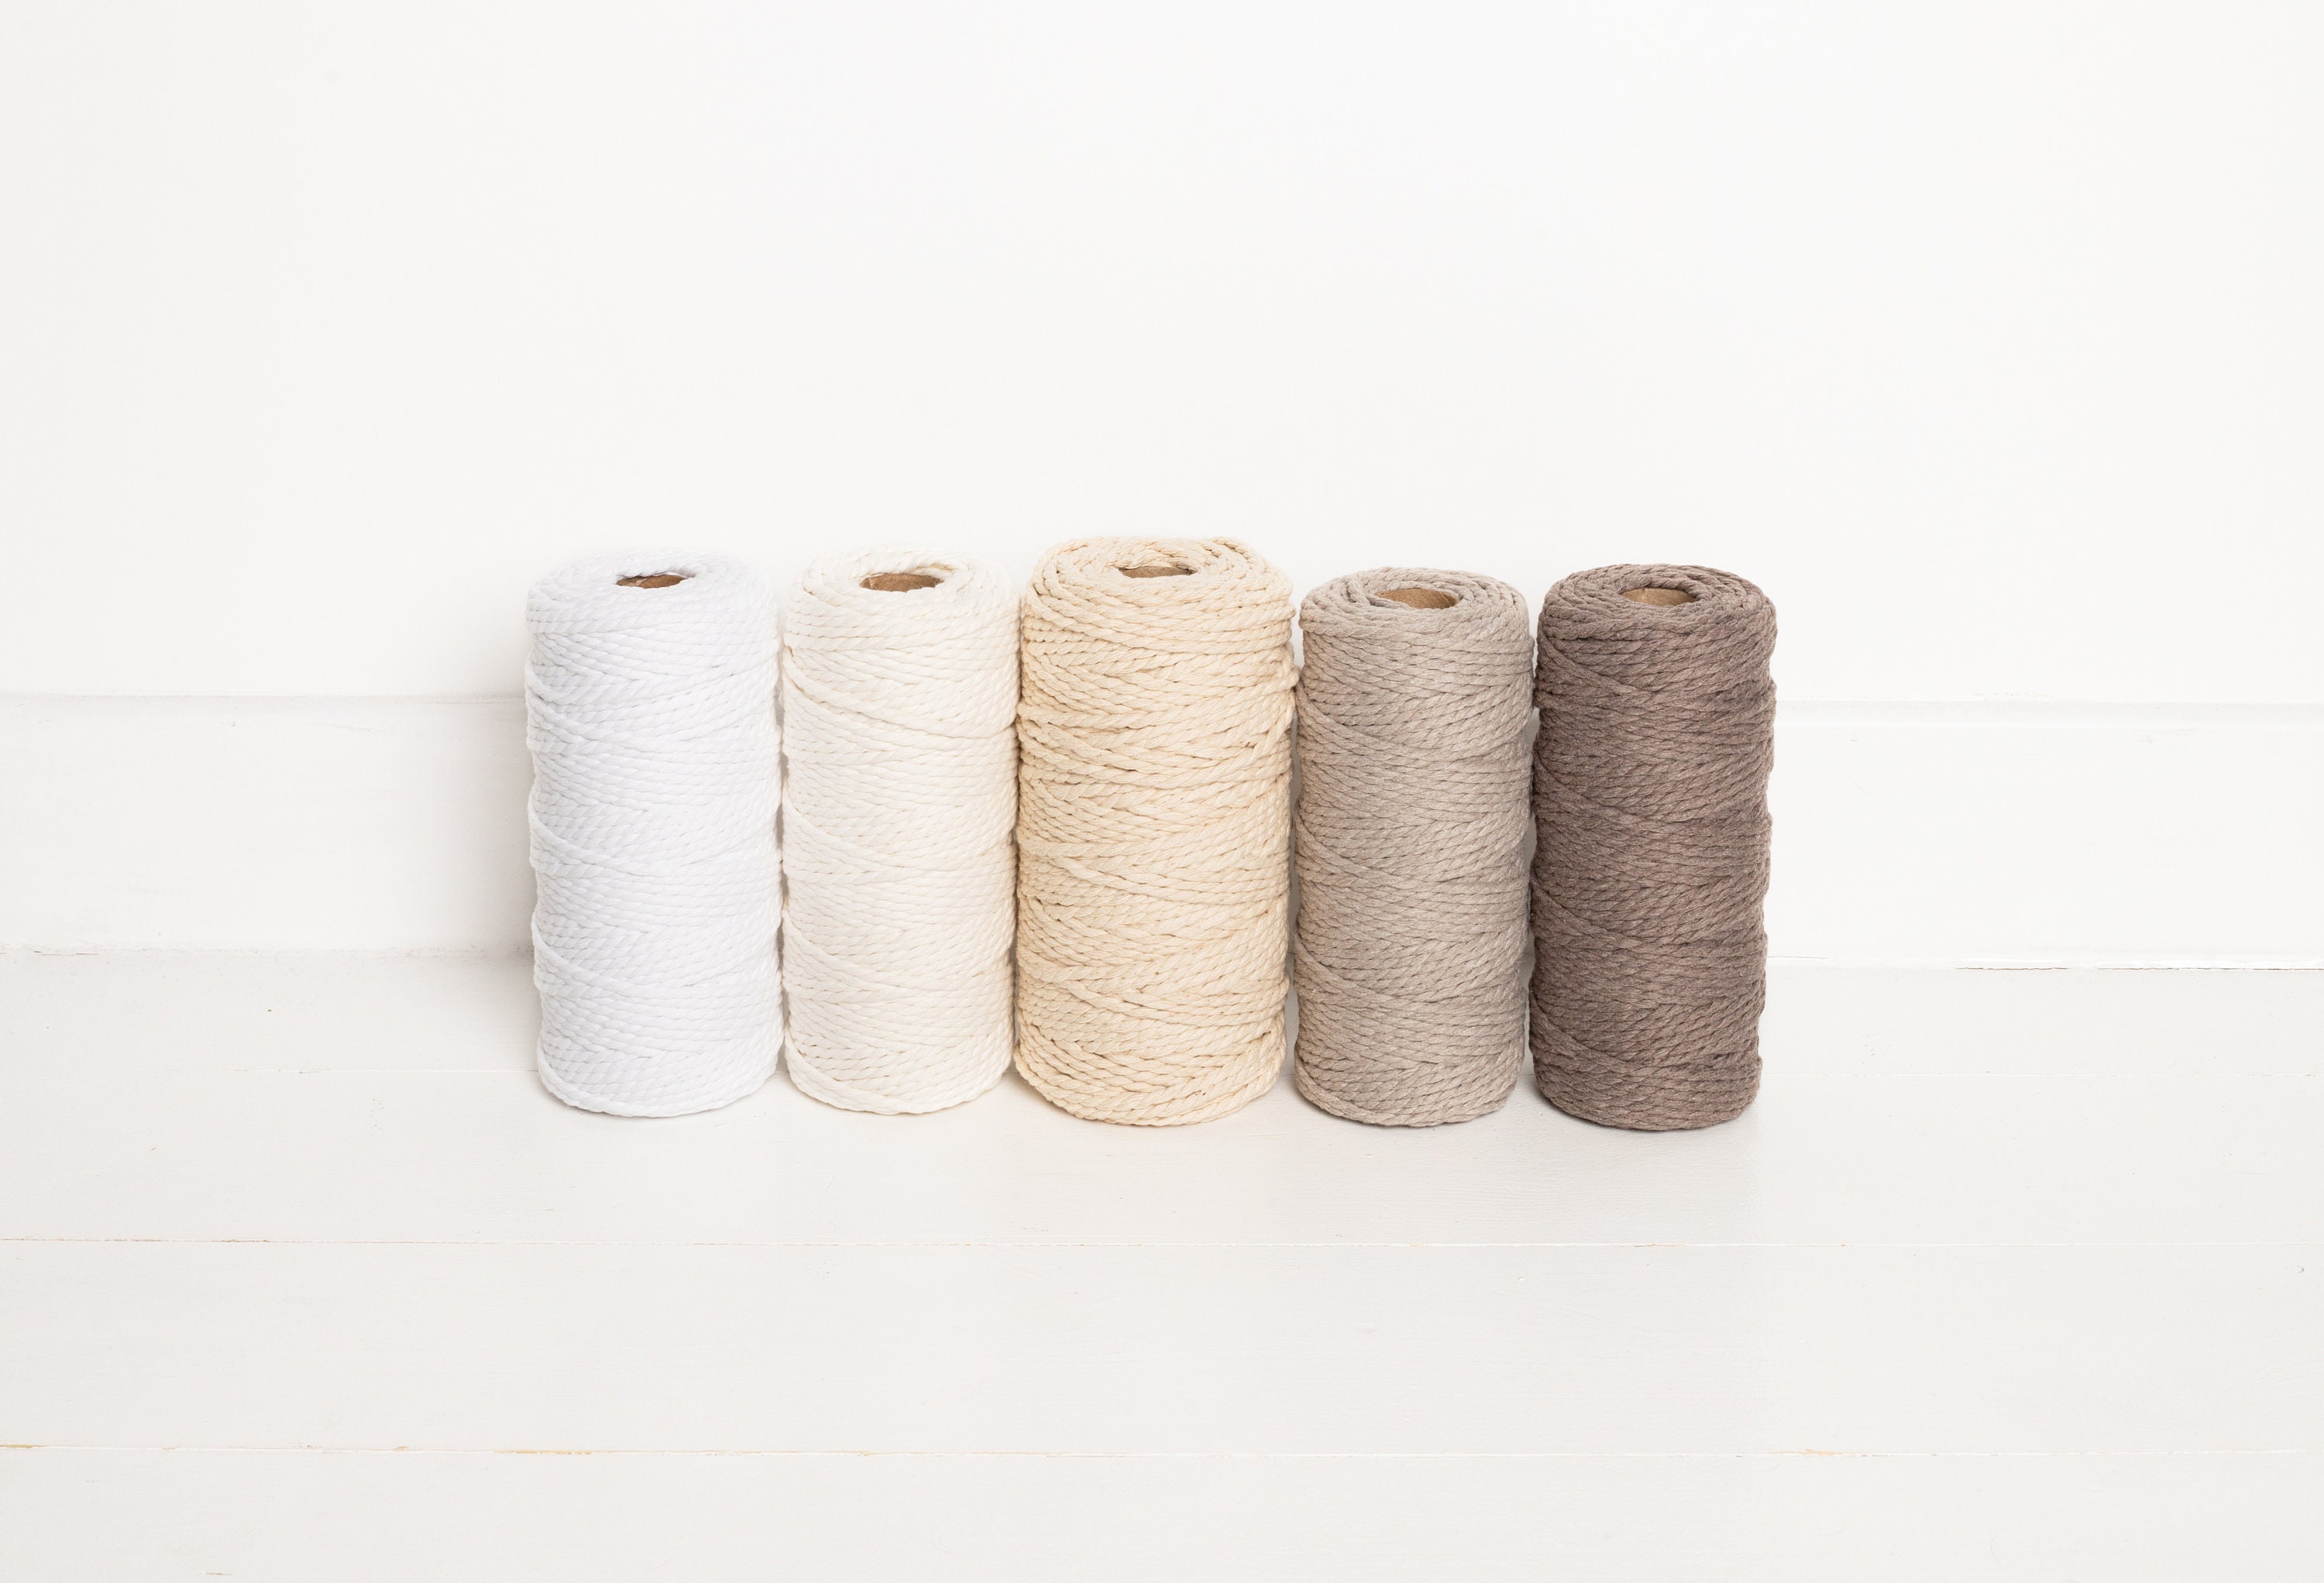 Natural Macramé Cord 100% Cotton 2mm, 3mm, 4mm, 5mm, and 7mm